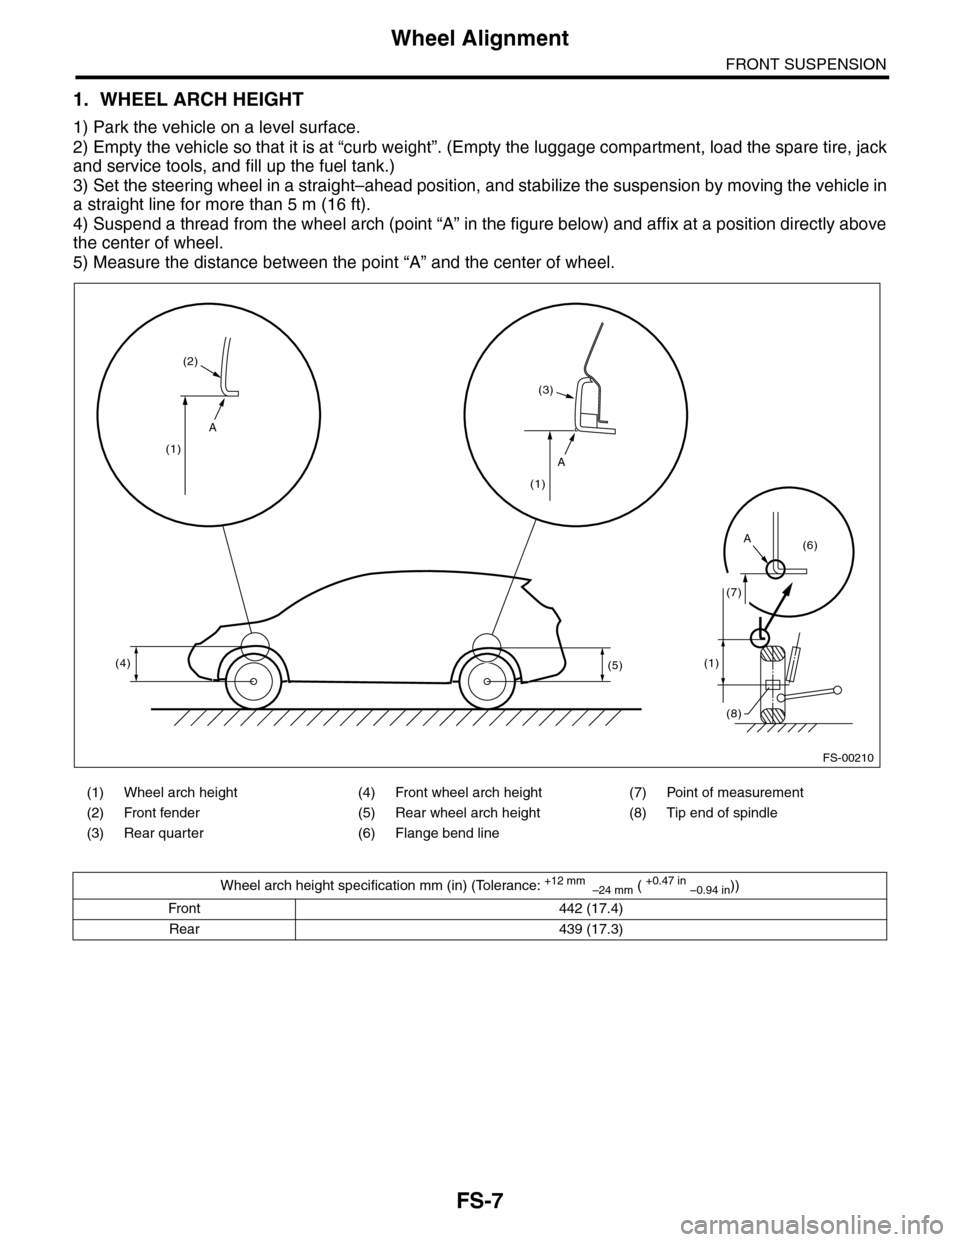 SUBARU TRIBECA 2009 1.G Service Workshop Manual FS-7
Wheel Alignment
FRONT SUSPENSION
1. WHEEL ARCH HEIGHT
1) Park the vehicle on a level surface.
2) Empty the vehicle so that it is at “curb weight”. (Empty the luggage compartment, load the spa